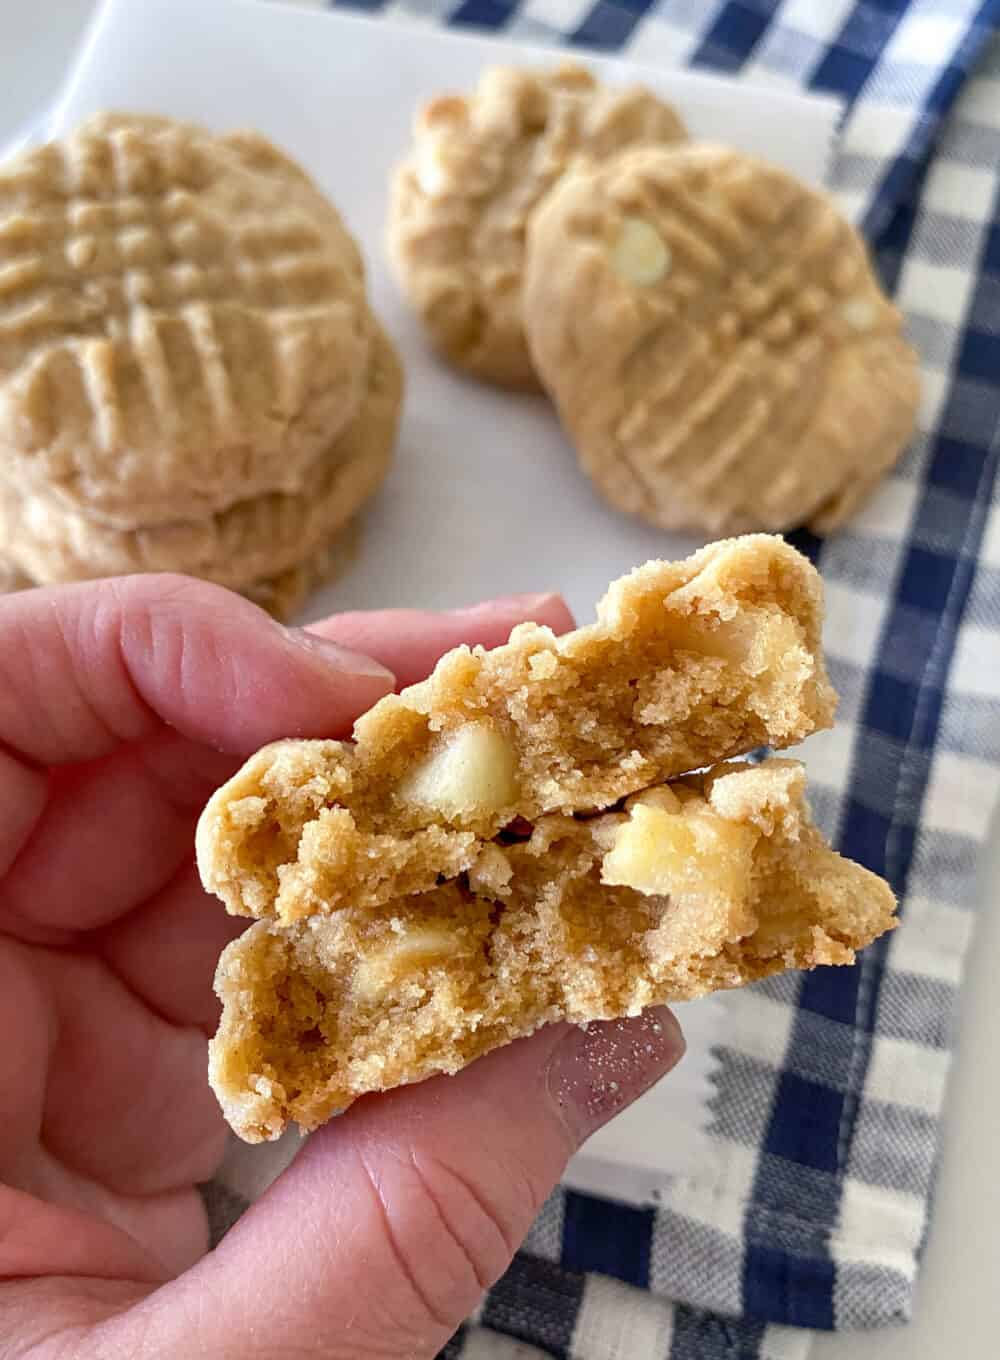 A Soft Apple Peanut Butter Cookie Broken in Half to Show the Inside